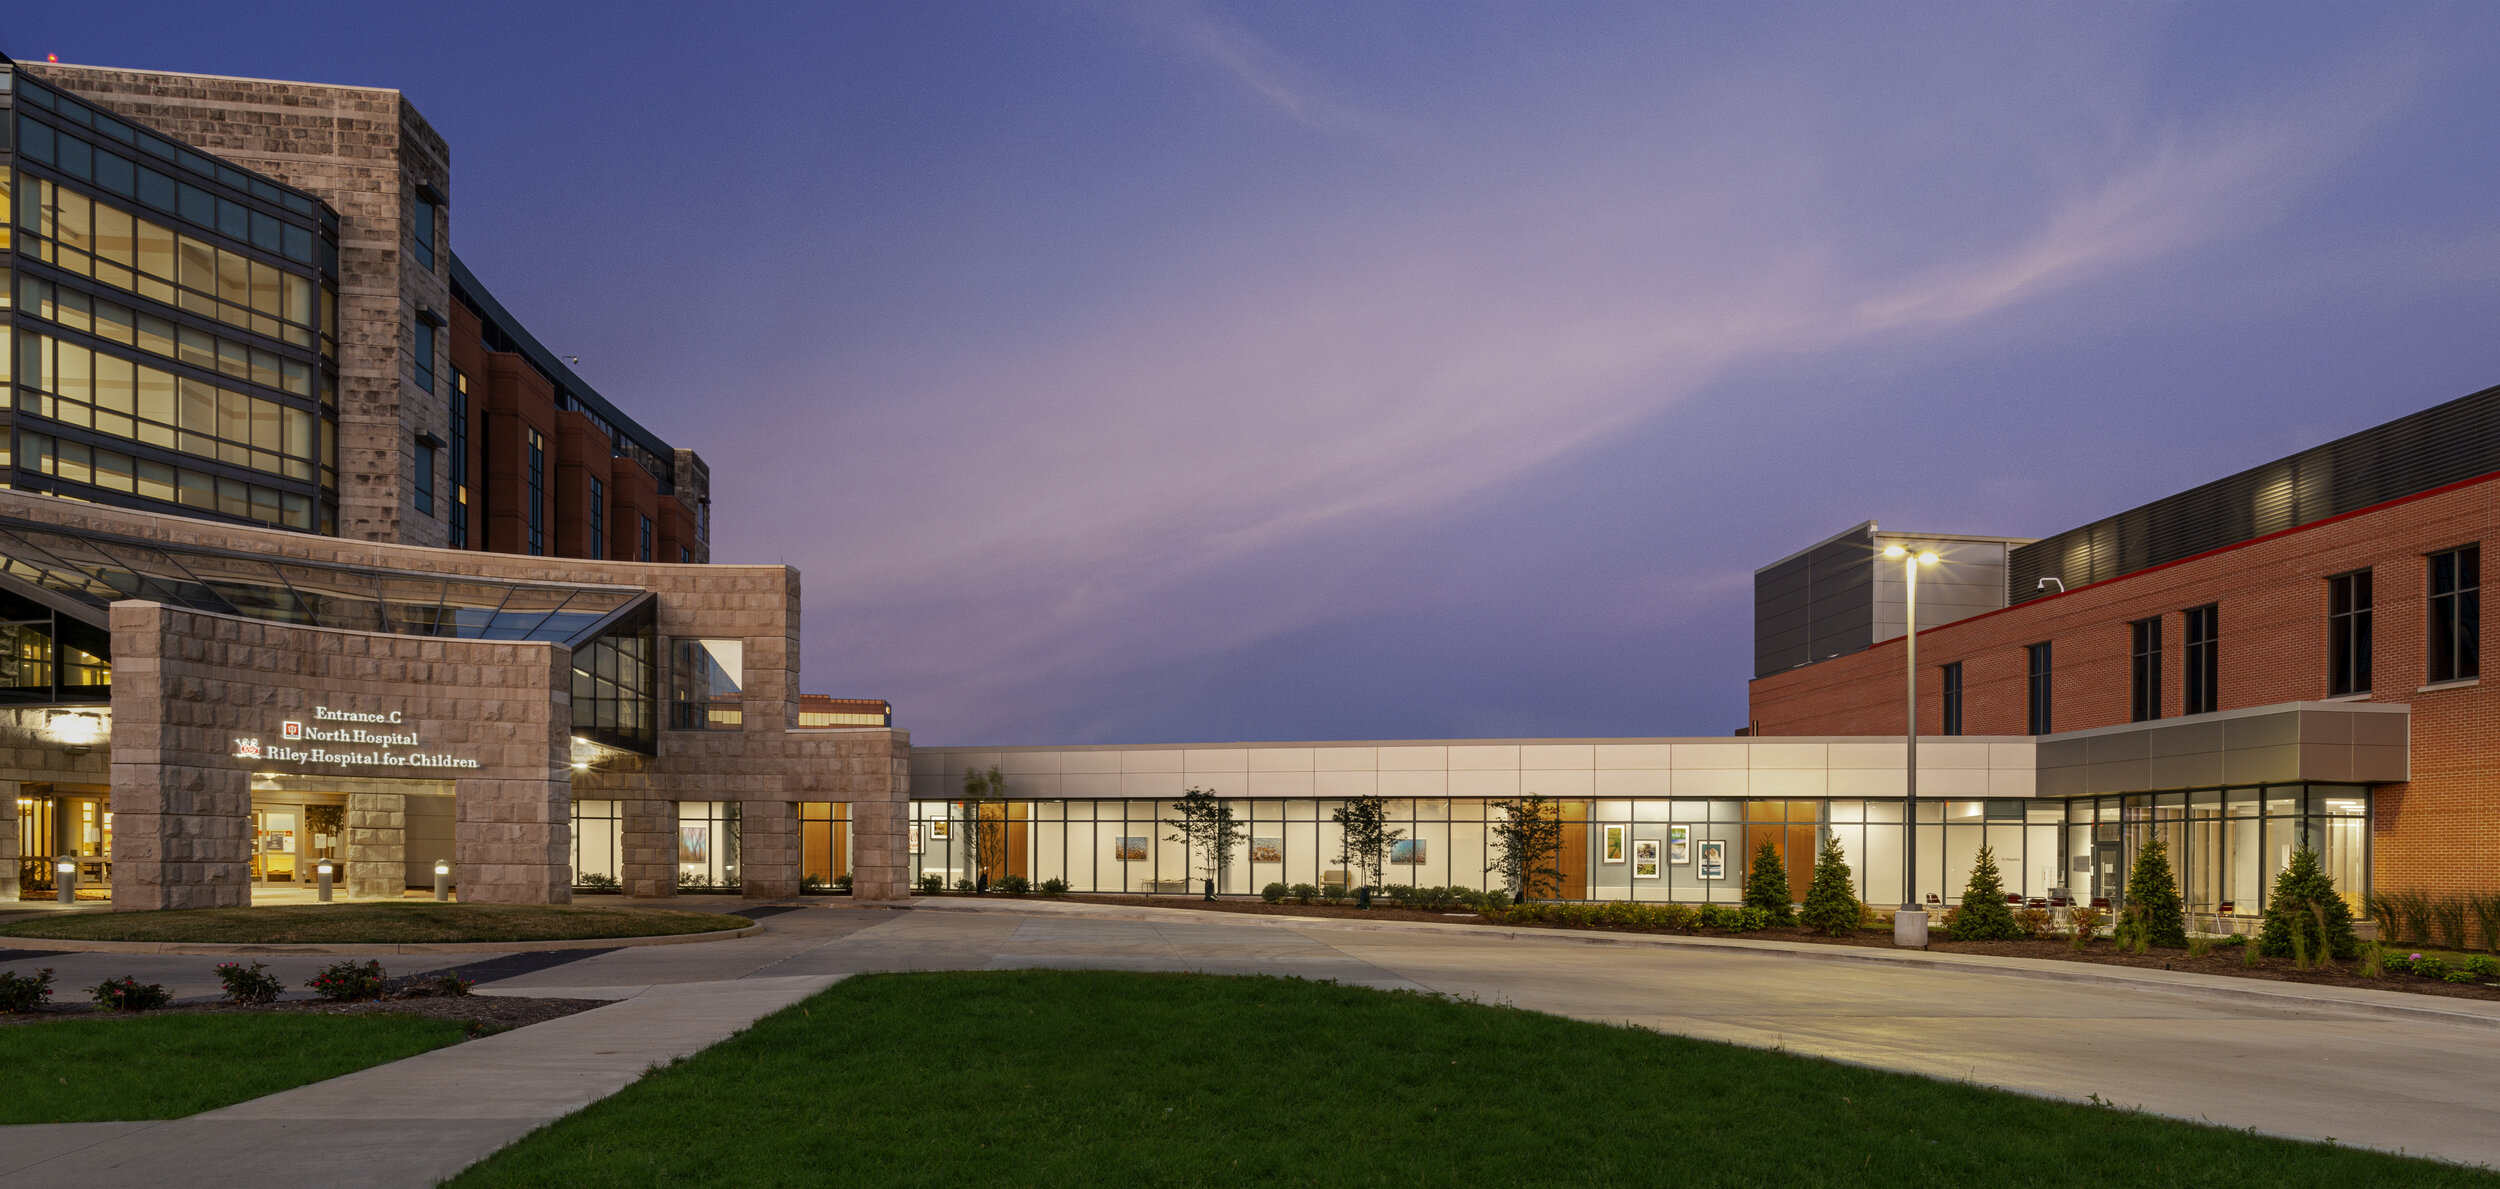 Photograph of a hospital at twilight, taken by architectural photographer Al Ensley.